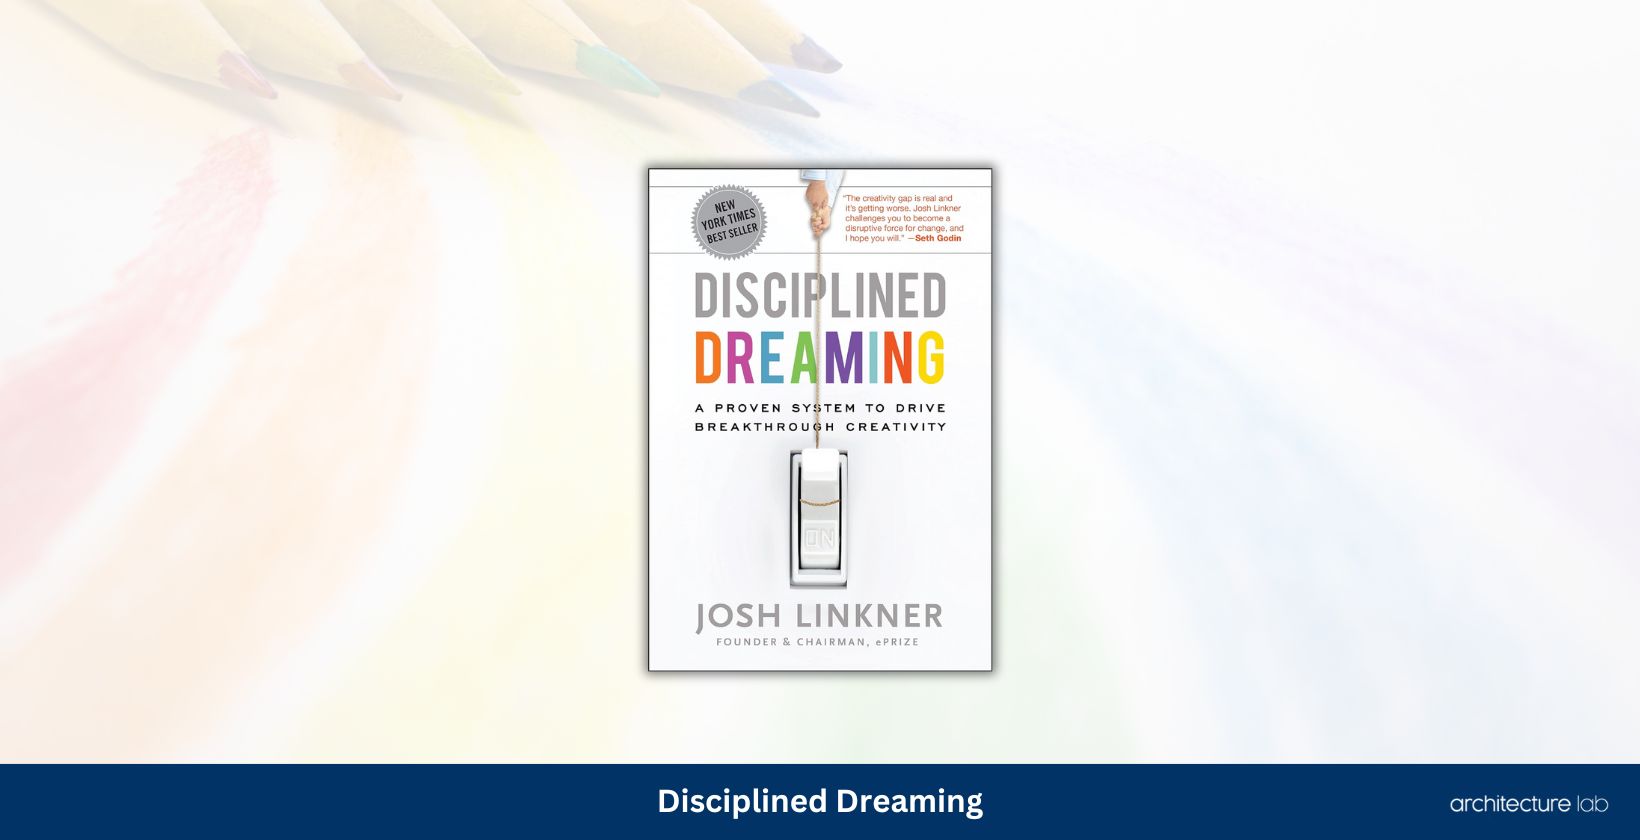 Disciplined dreaming